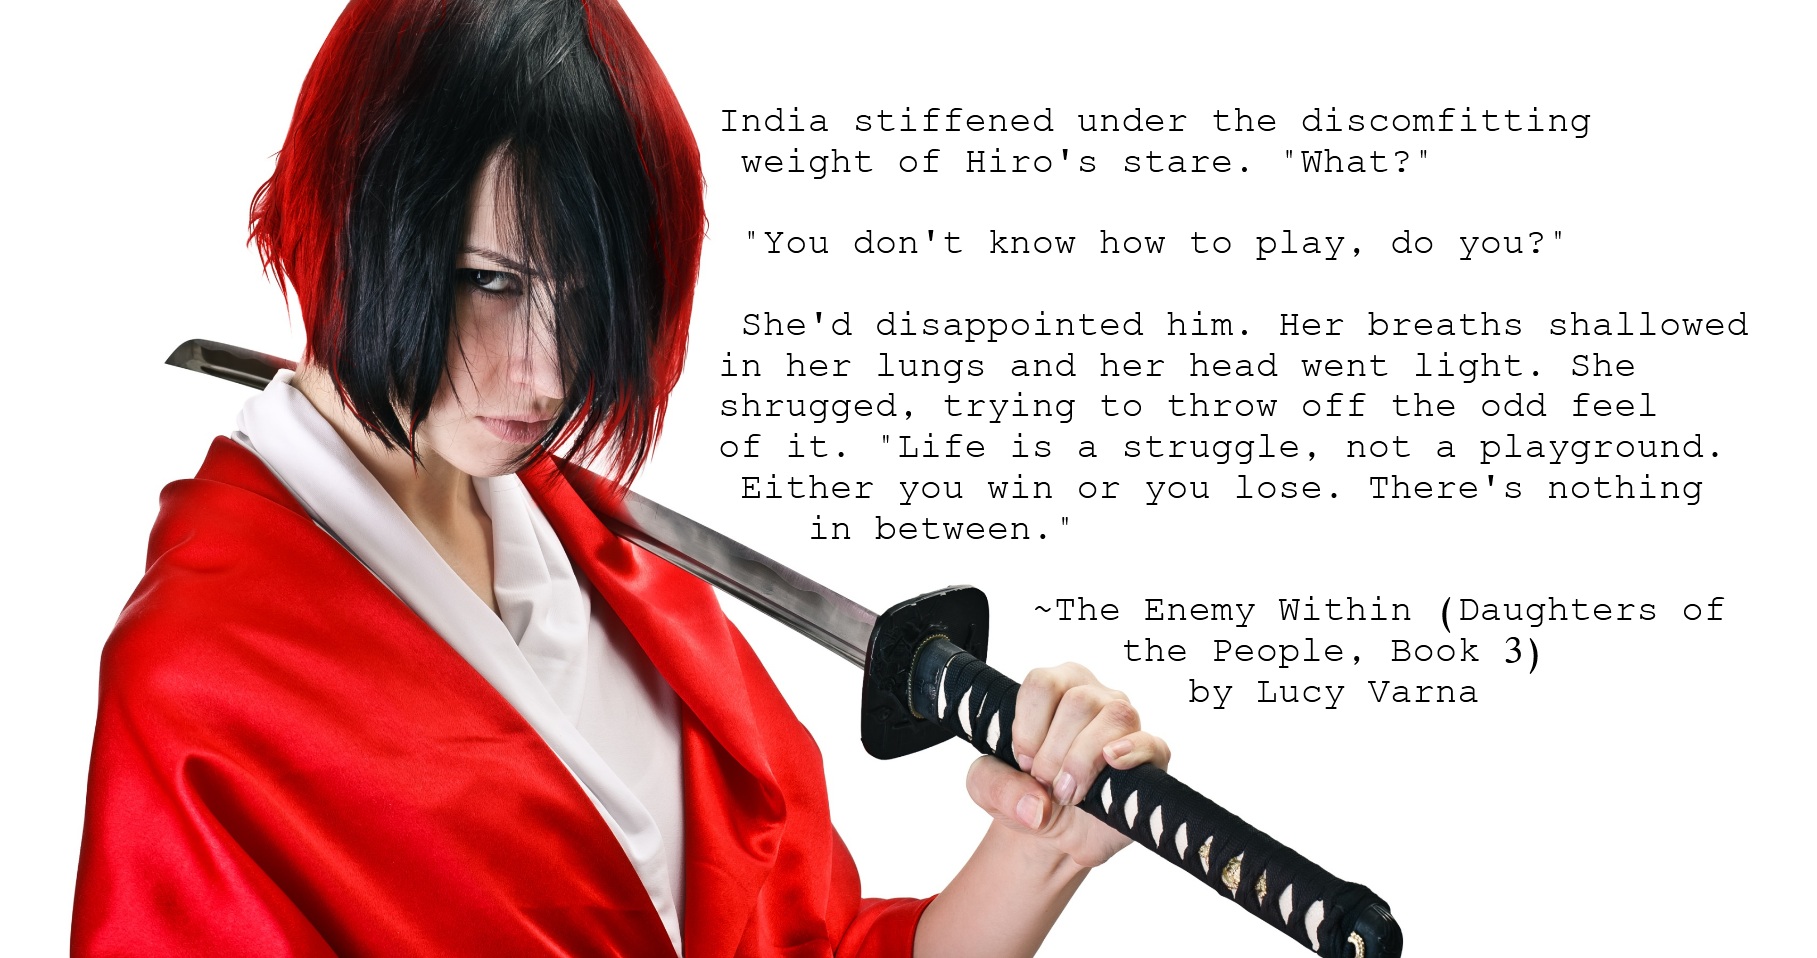 India Furia, The Enemy Within by Lucy Varna